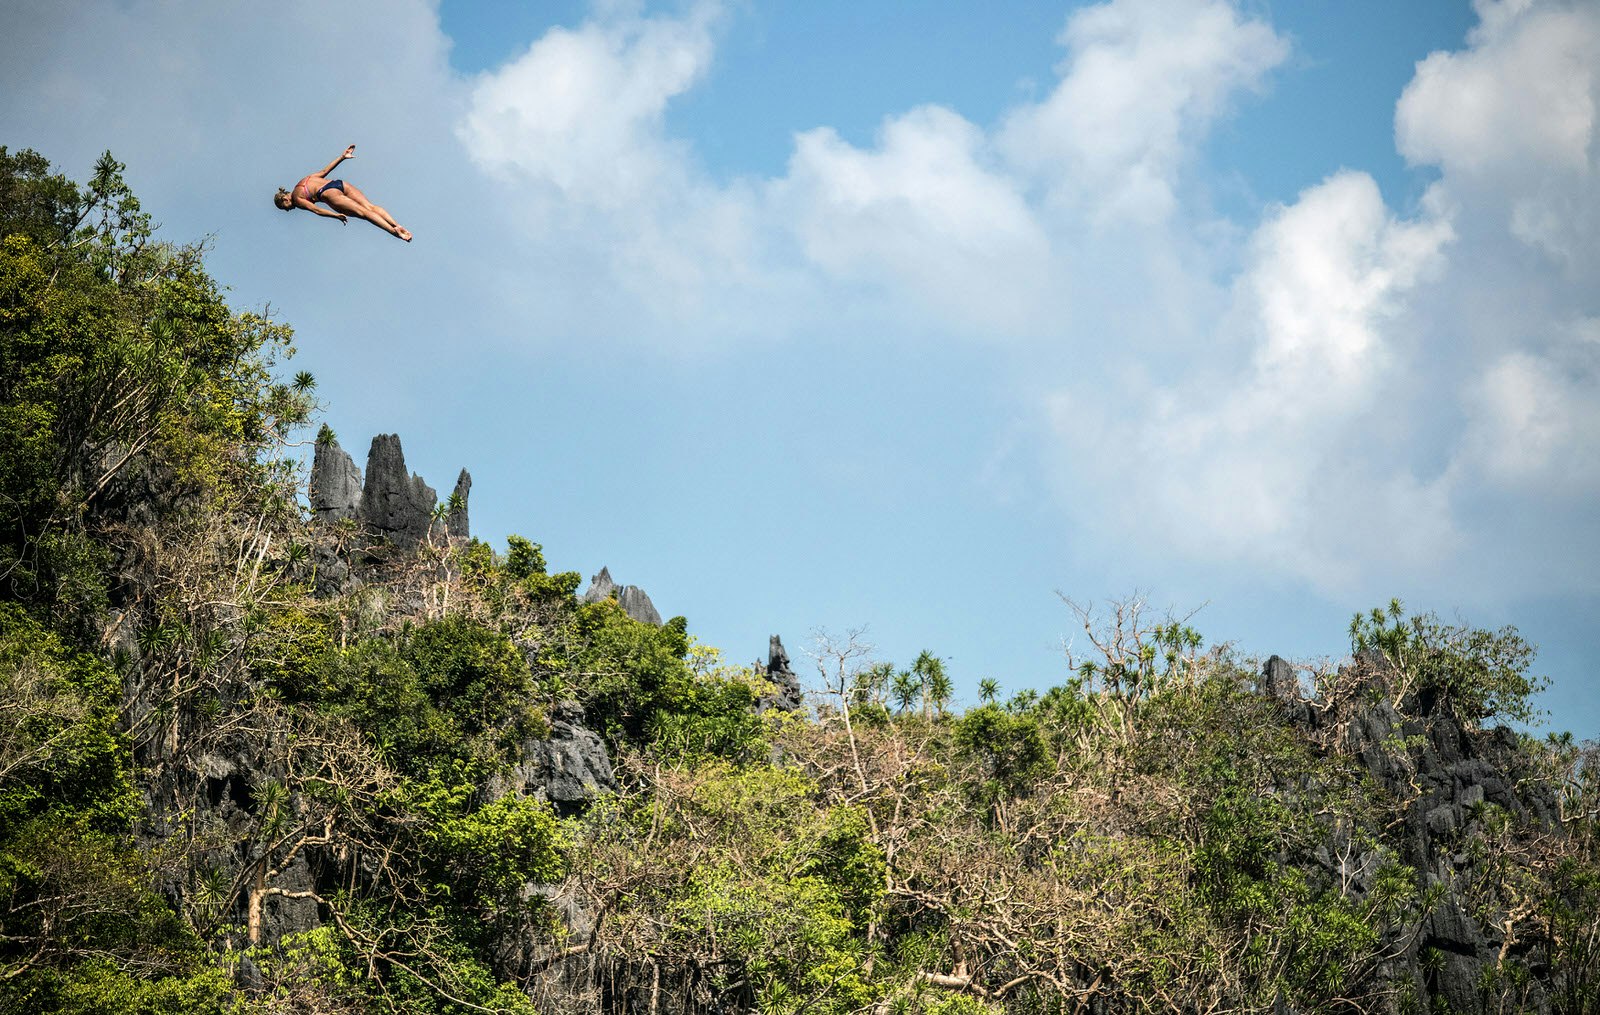 Palawan travel - Philippines: In this handout image provided by Red Bull, Rhiannan Iffland of Australia dives from the 21 metre platform at the Big Lagoon on Miniloc Island during the final competition day of the first stop of the Red Bull Cliff Diving World Series on April 13, 2019 at Palawan, Philippines. (Photo by Romina Amato/Red Bull via Getty Images)